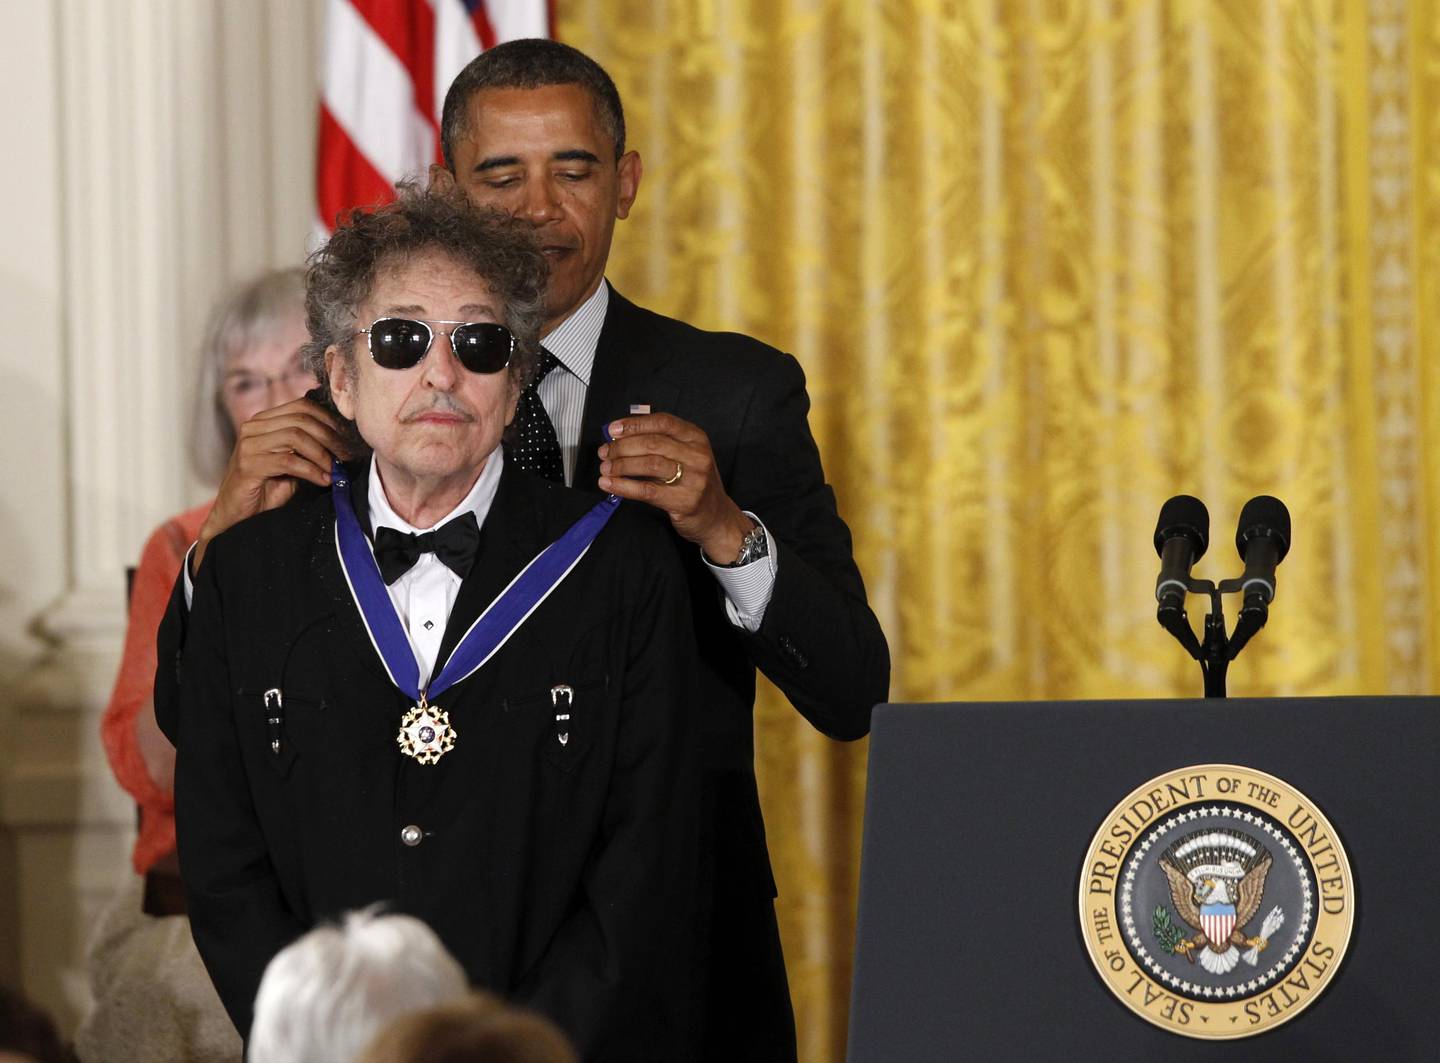 President Barack Obama presents rock legend Bob Dylan with a Medal of Freedom,  Tuesday, May 29, 2012, during a ceremony at the White House in Washington.  (AP Photo/Charles Dharapak)